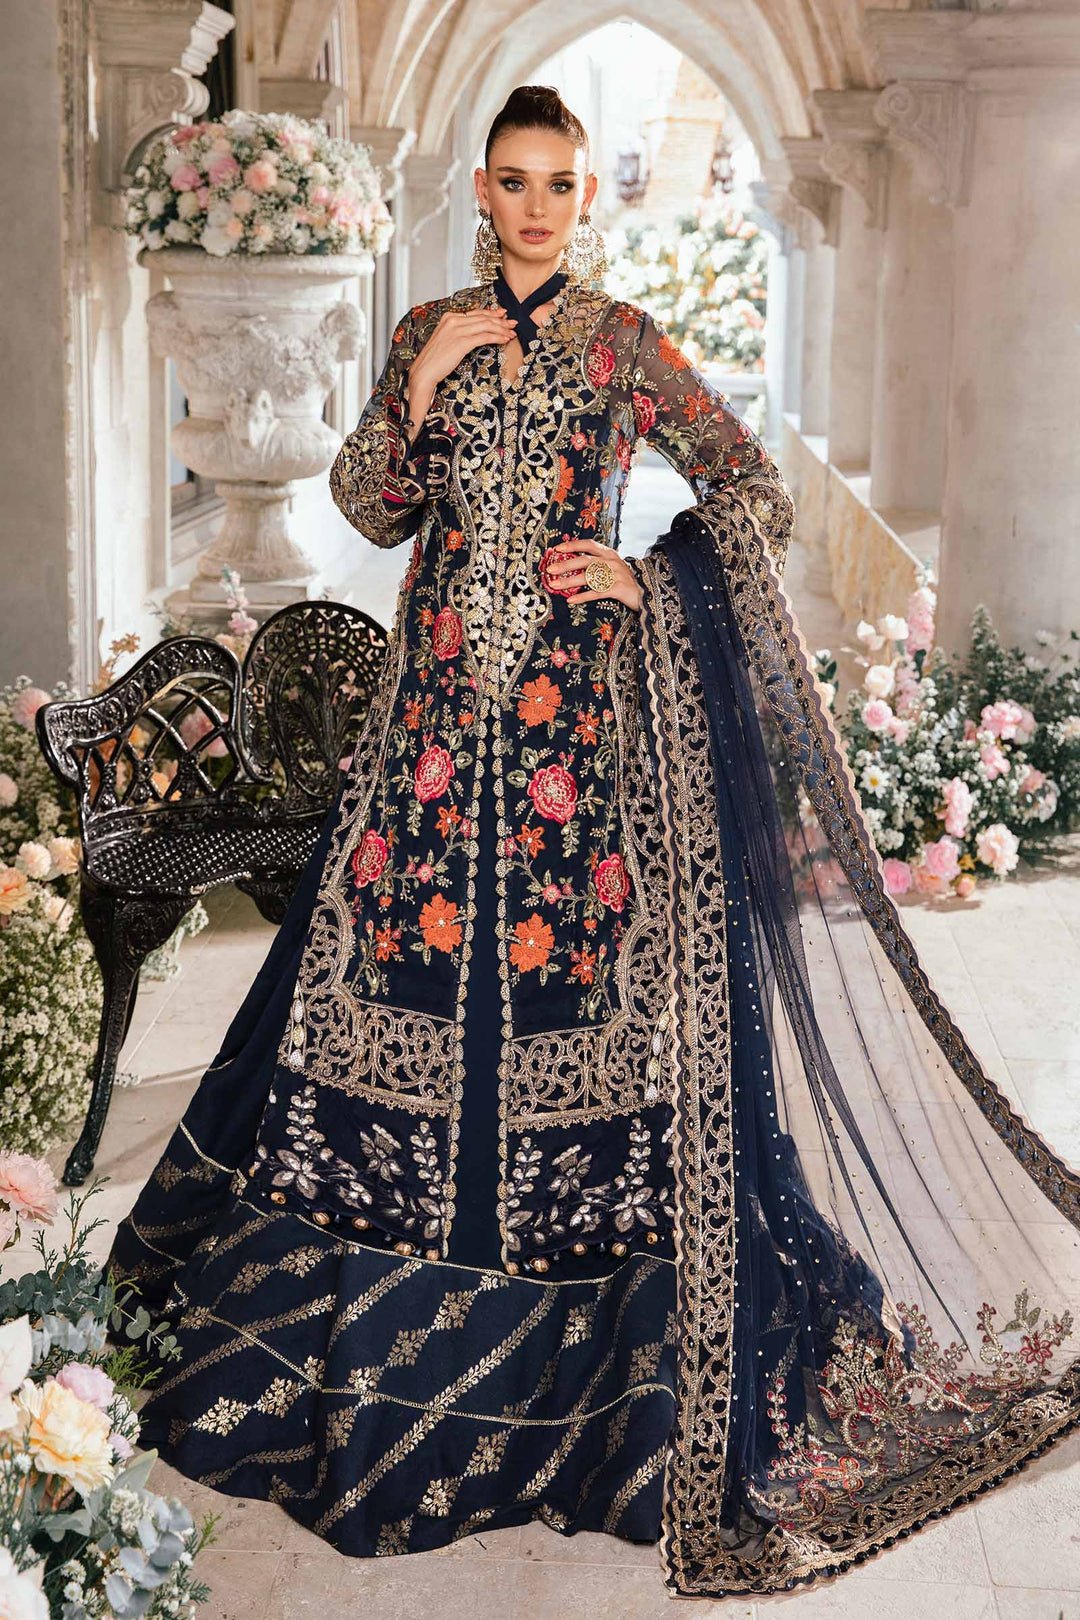 3 PIECE UNSTITCHED EMBROIDERED SUIT | BD - 2808 - STYLISTICOUTURE